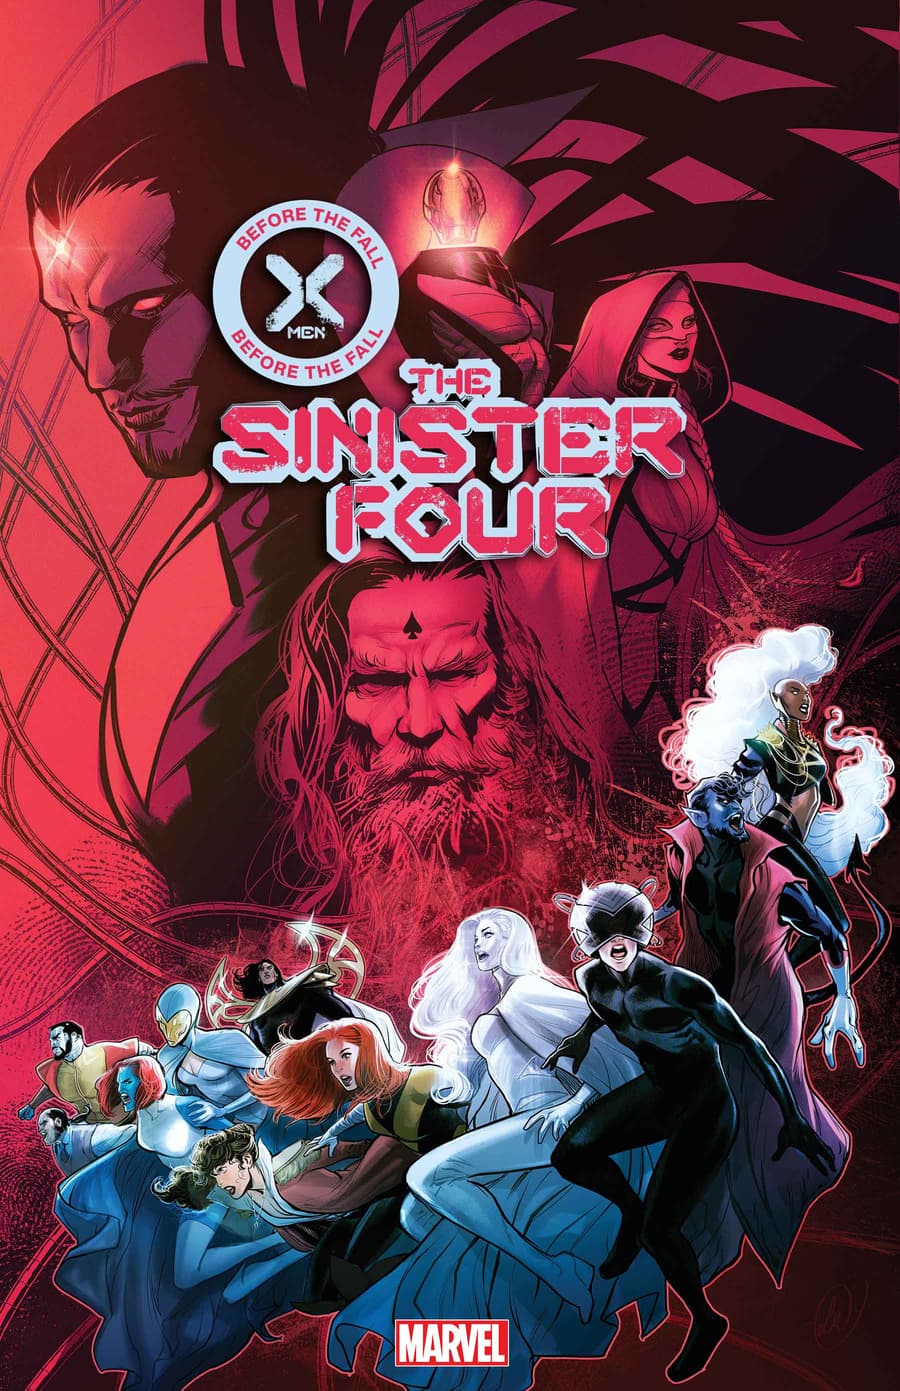 X-MEN: BEFORE THE FALL - SINISTER FOUR Cover by Lucas Werneck